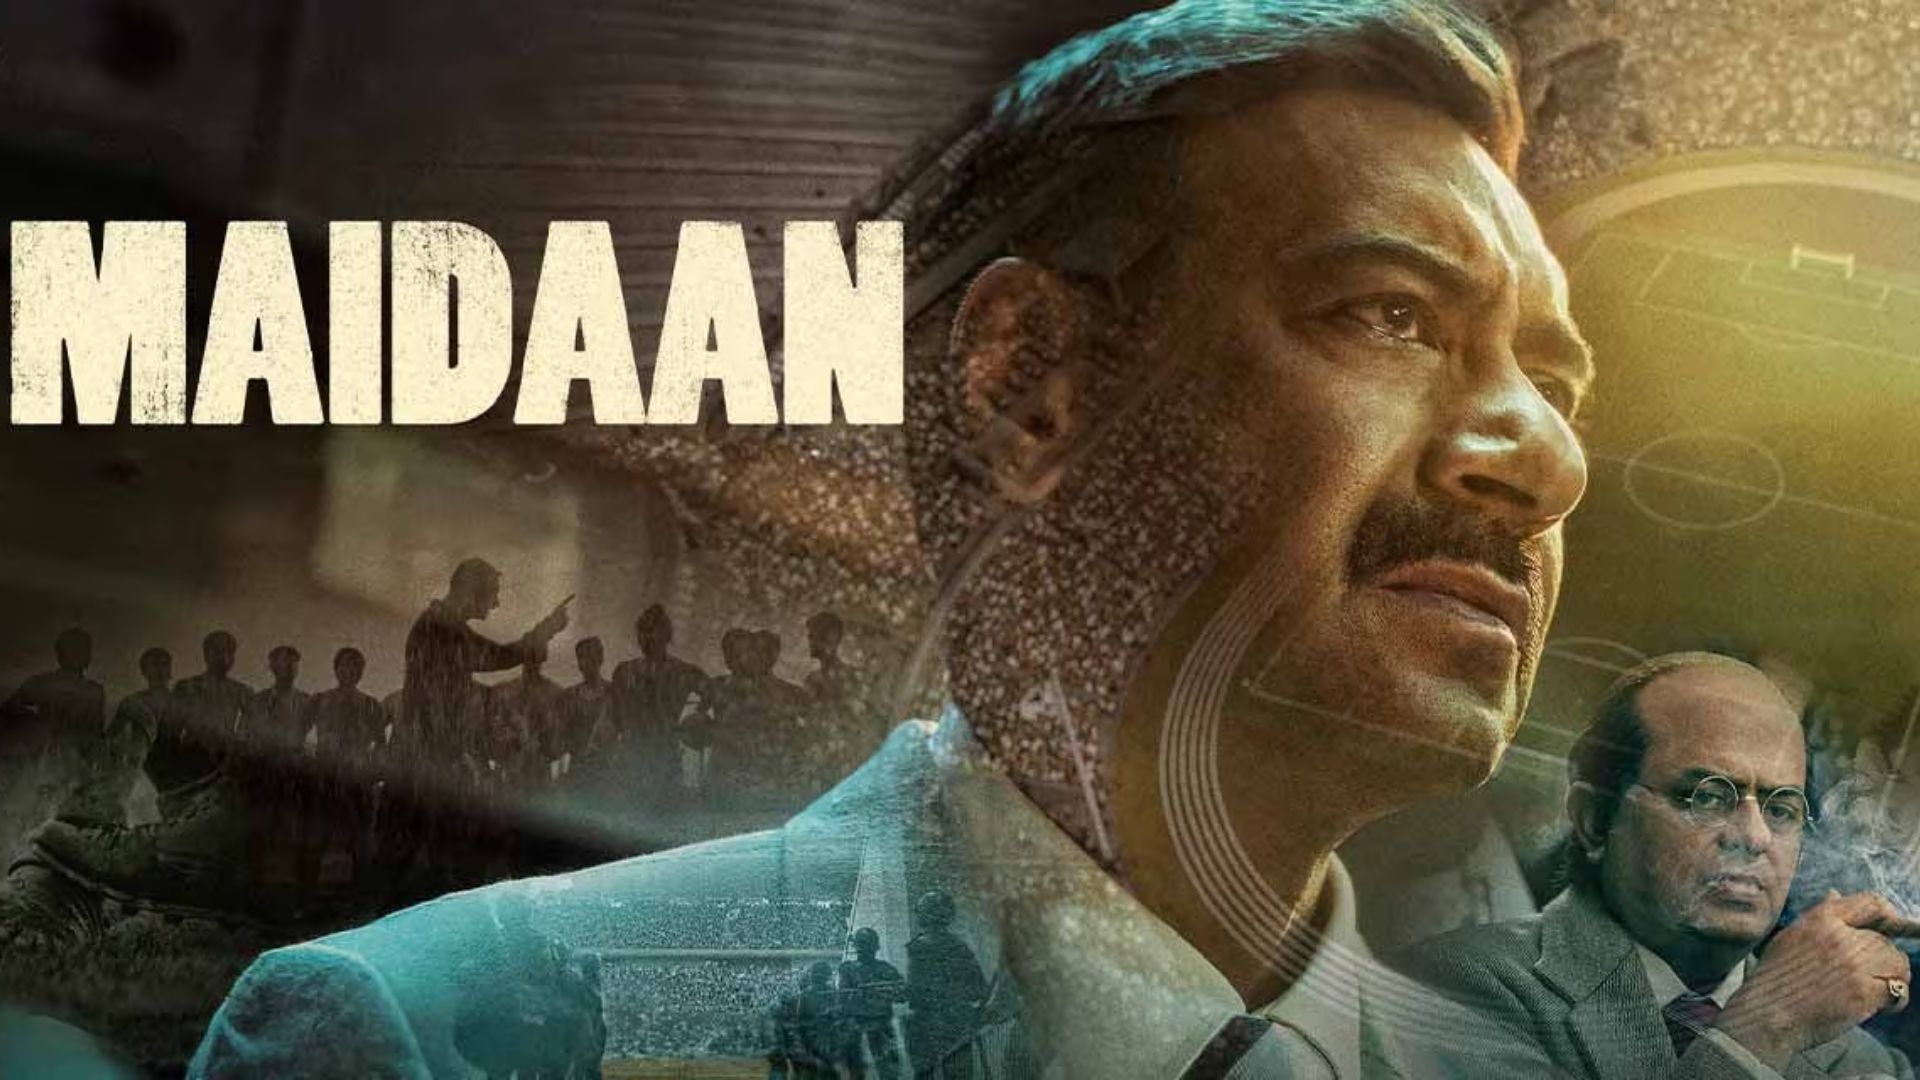 ‘Maidaan’ day1 box office collection prediction: Ajay Devgn’s sports drama to open lower than Shaitaan